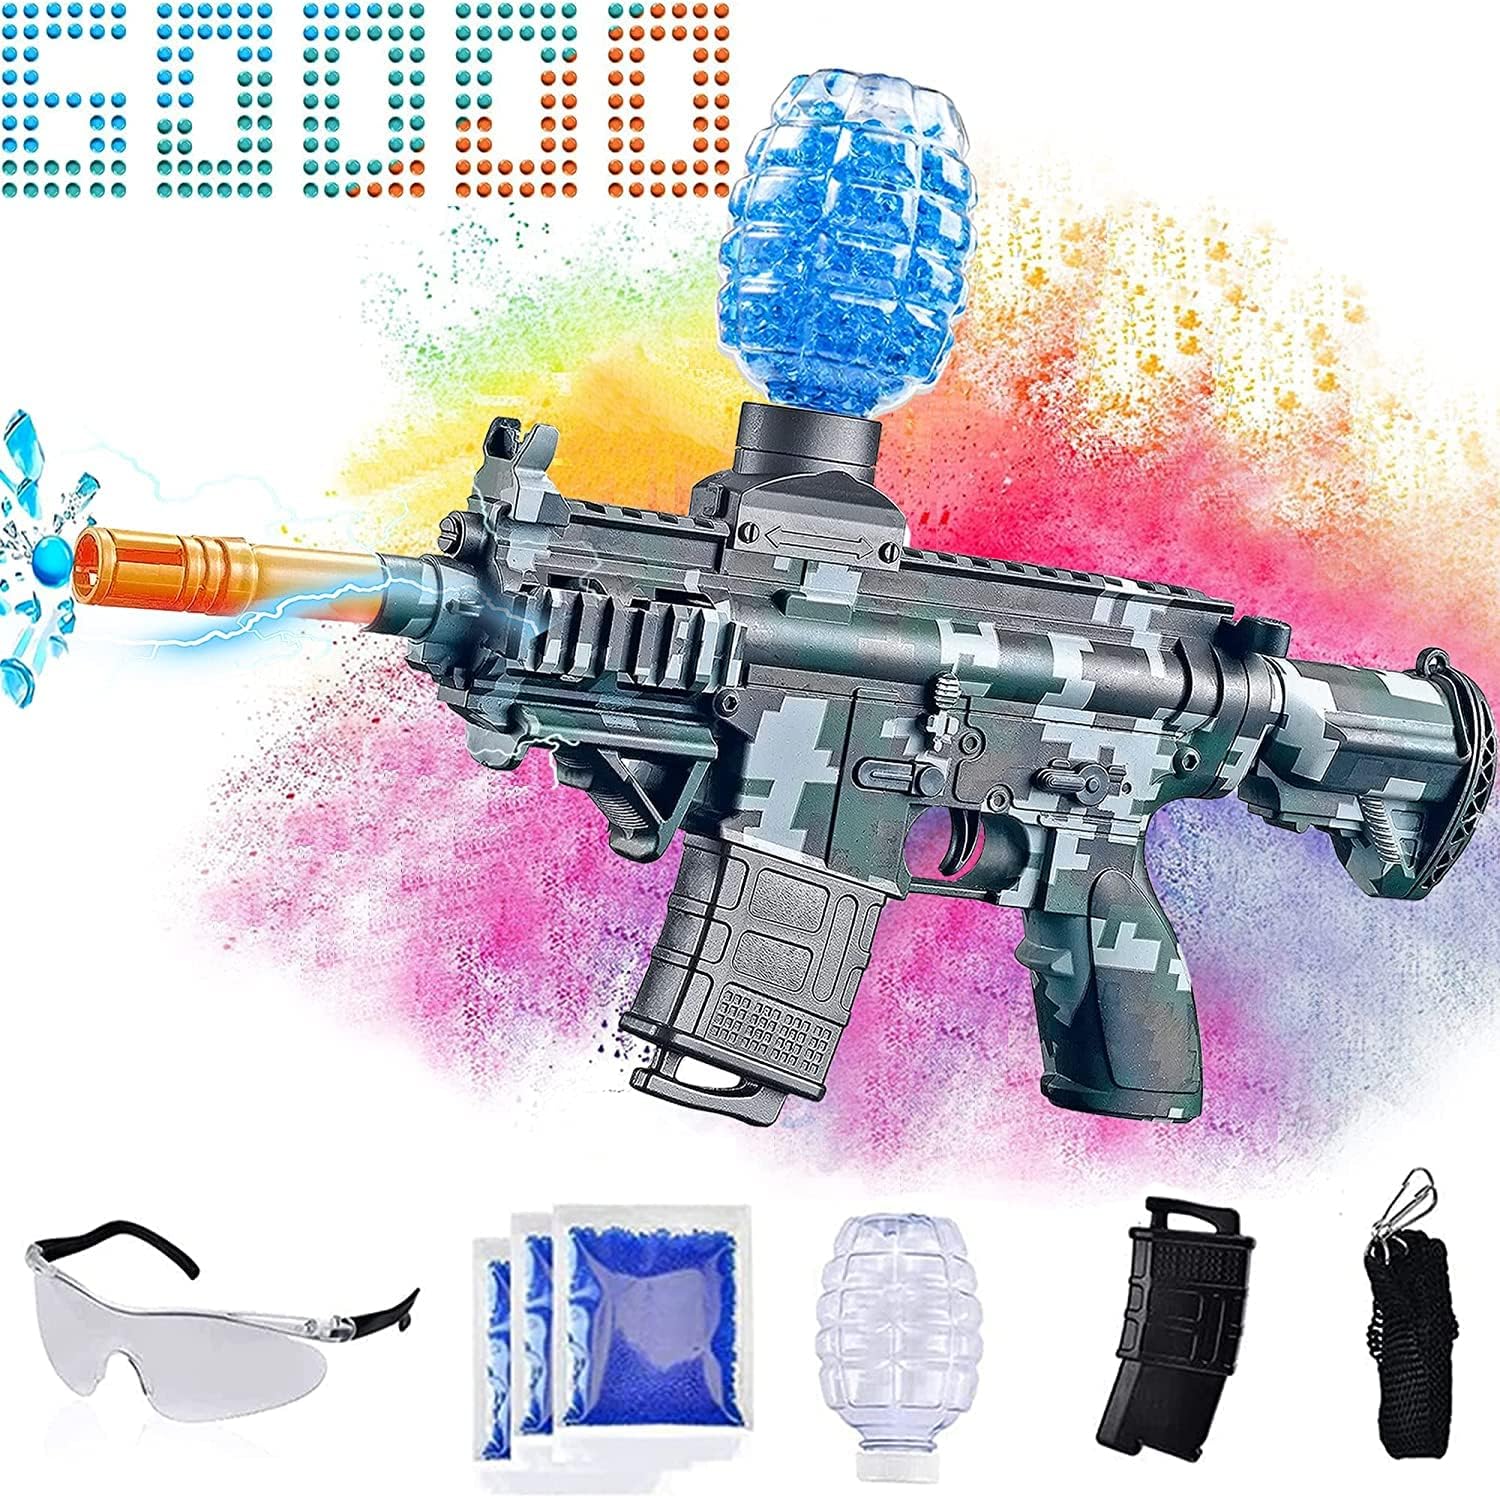 An affordable orbeez gun with an electric Orbeez gel ball blaster and accessories.